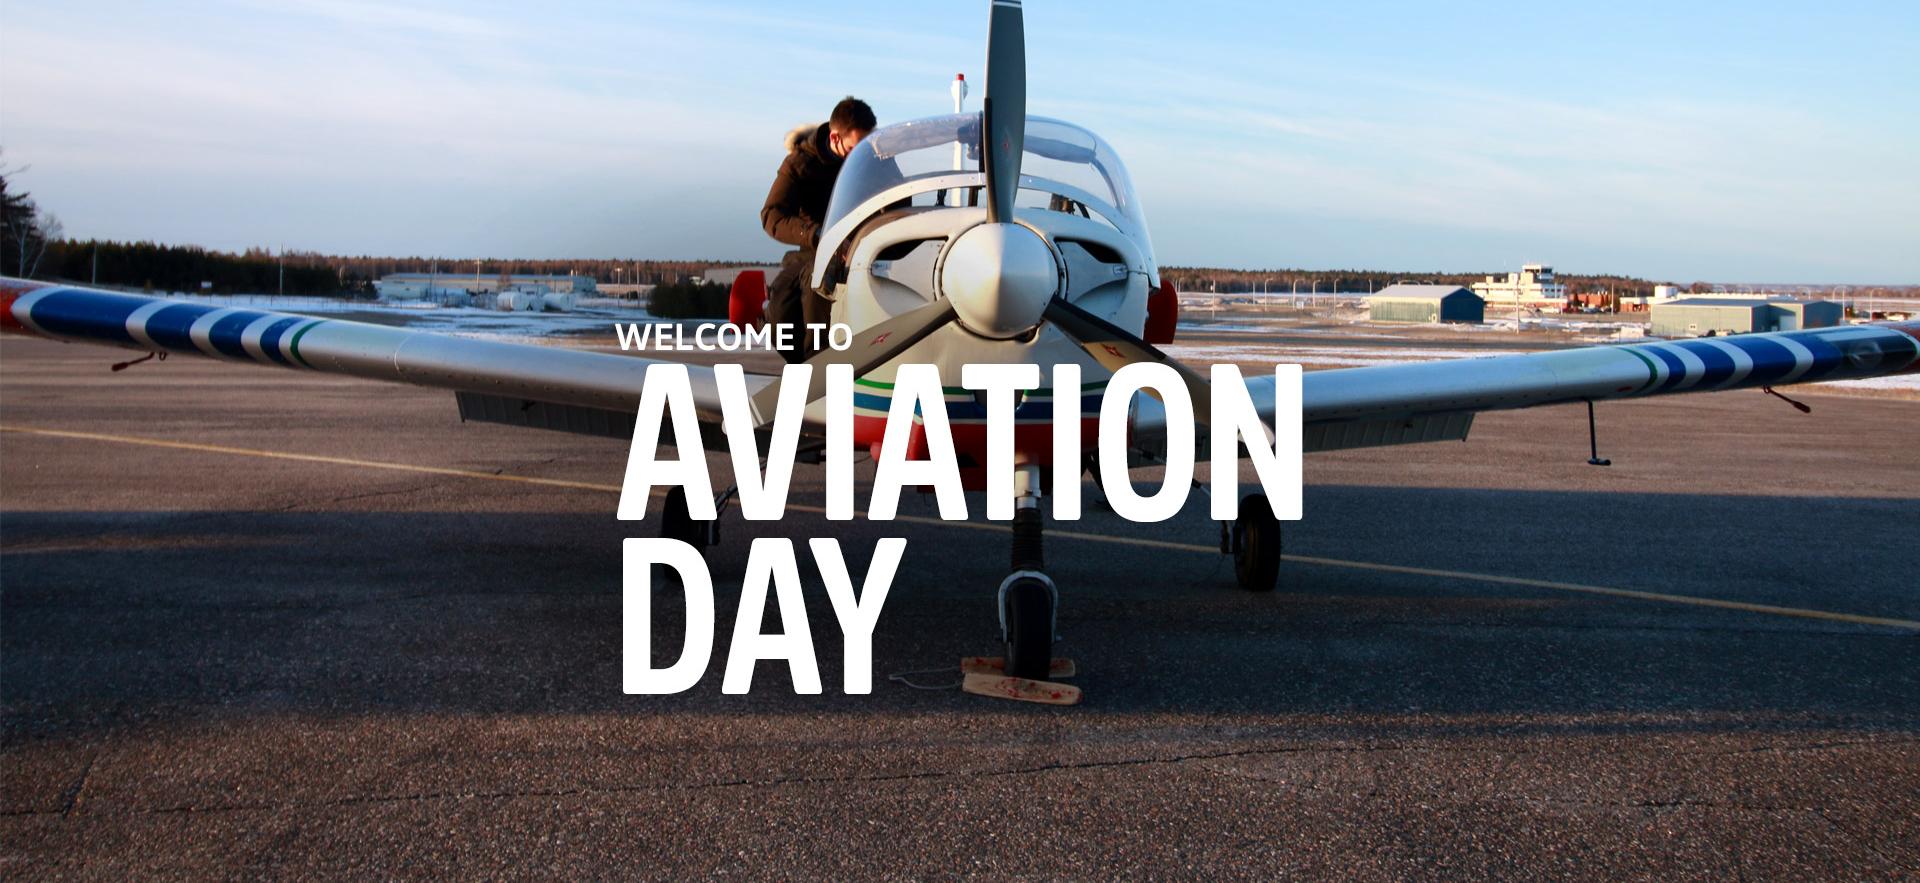 student on a plane landed at the о Hangar with white text overlay that says Welcome to Aviation Day